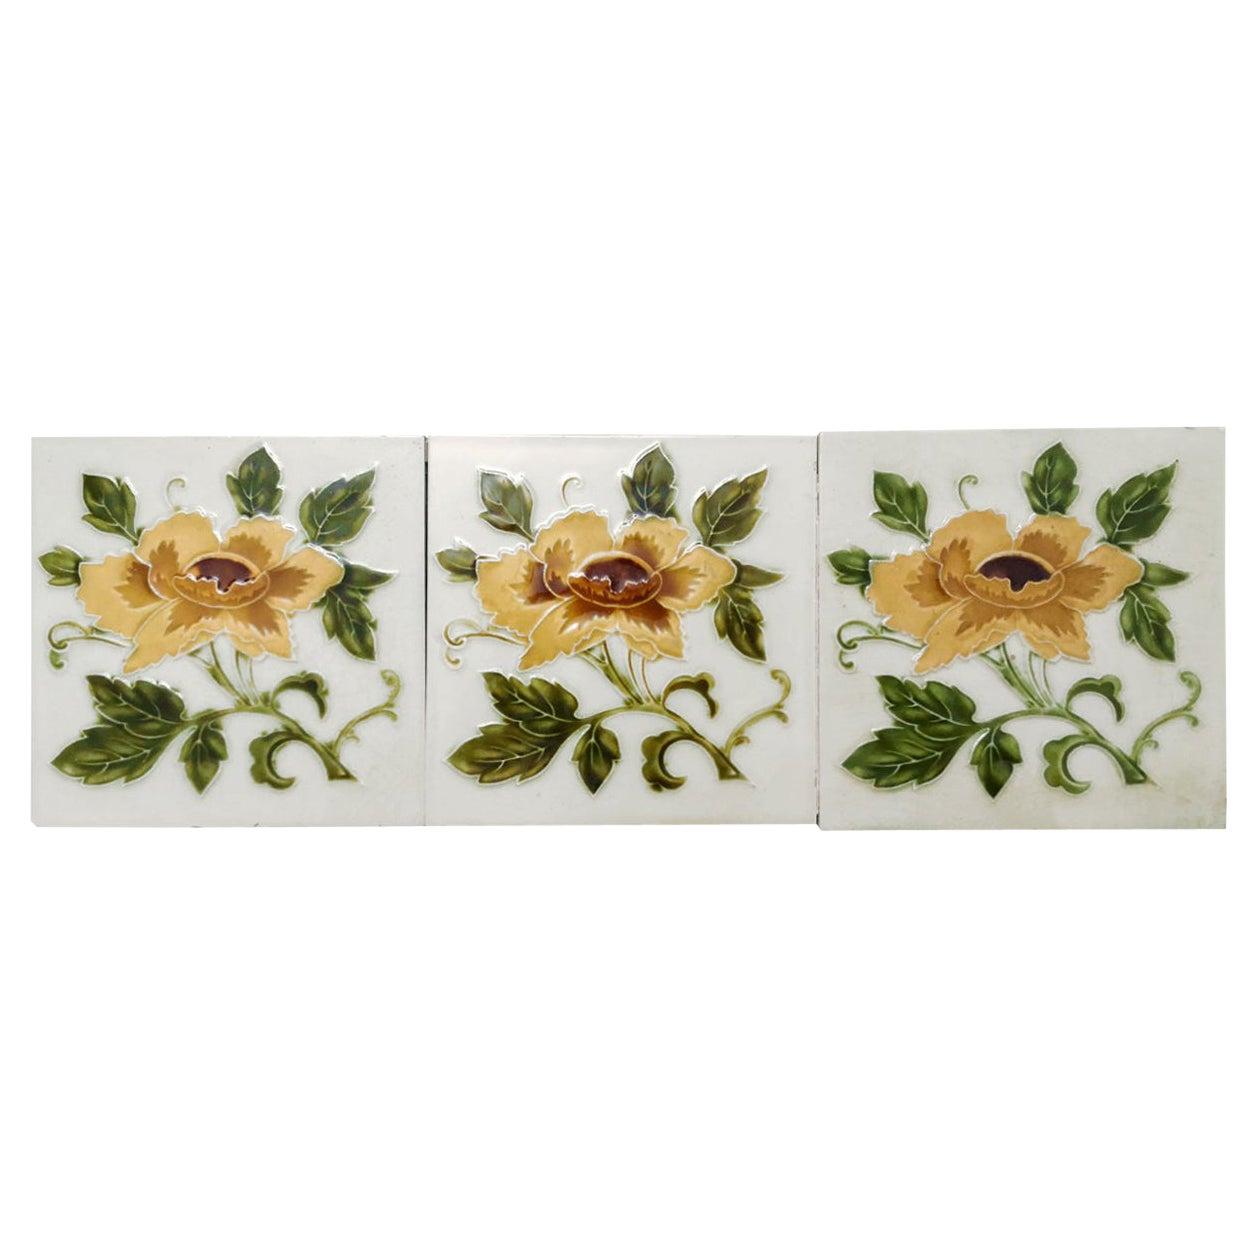 This is an amazing set of antique Art Nouveau handmade tiles with an image of yellow rose in relief on a soft yellow background. These tiles would be charming displayed on easels, framed or incorporated into a custom tile design.

Please note that